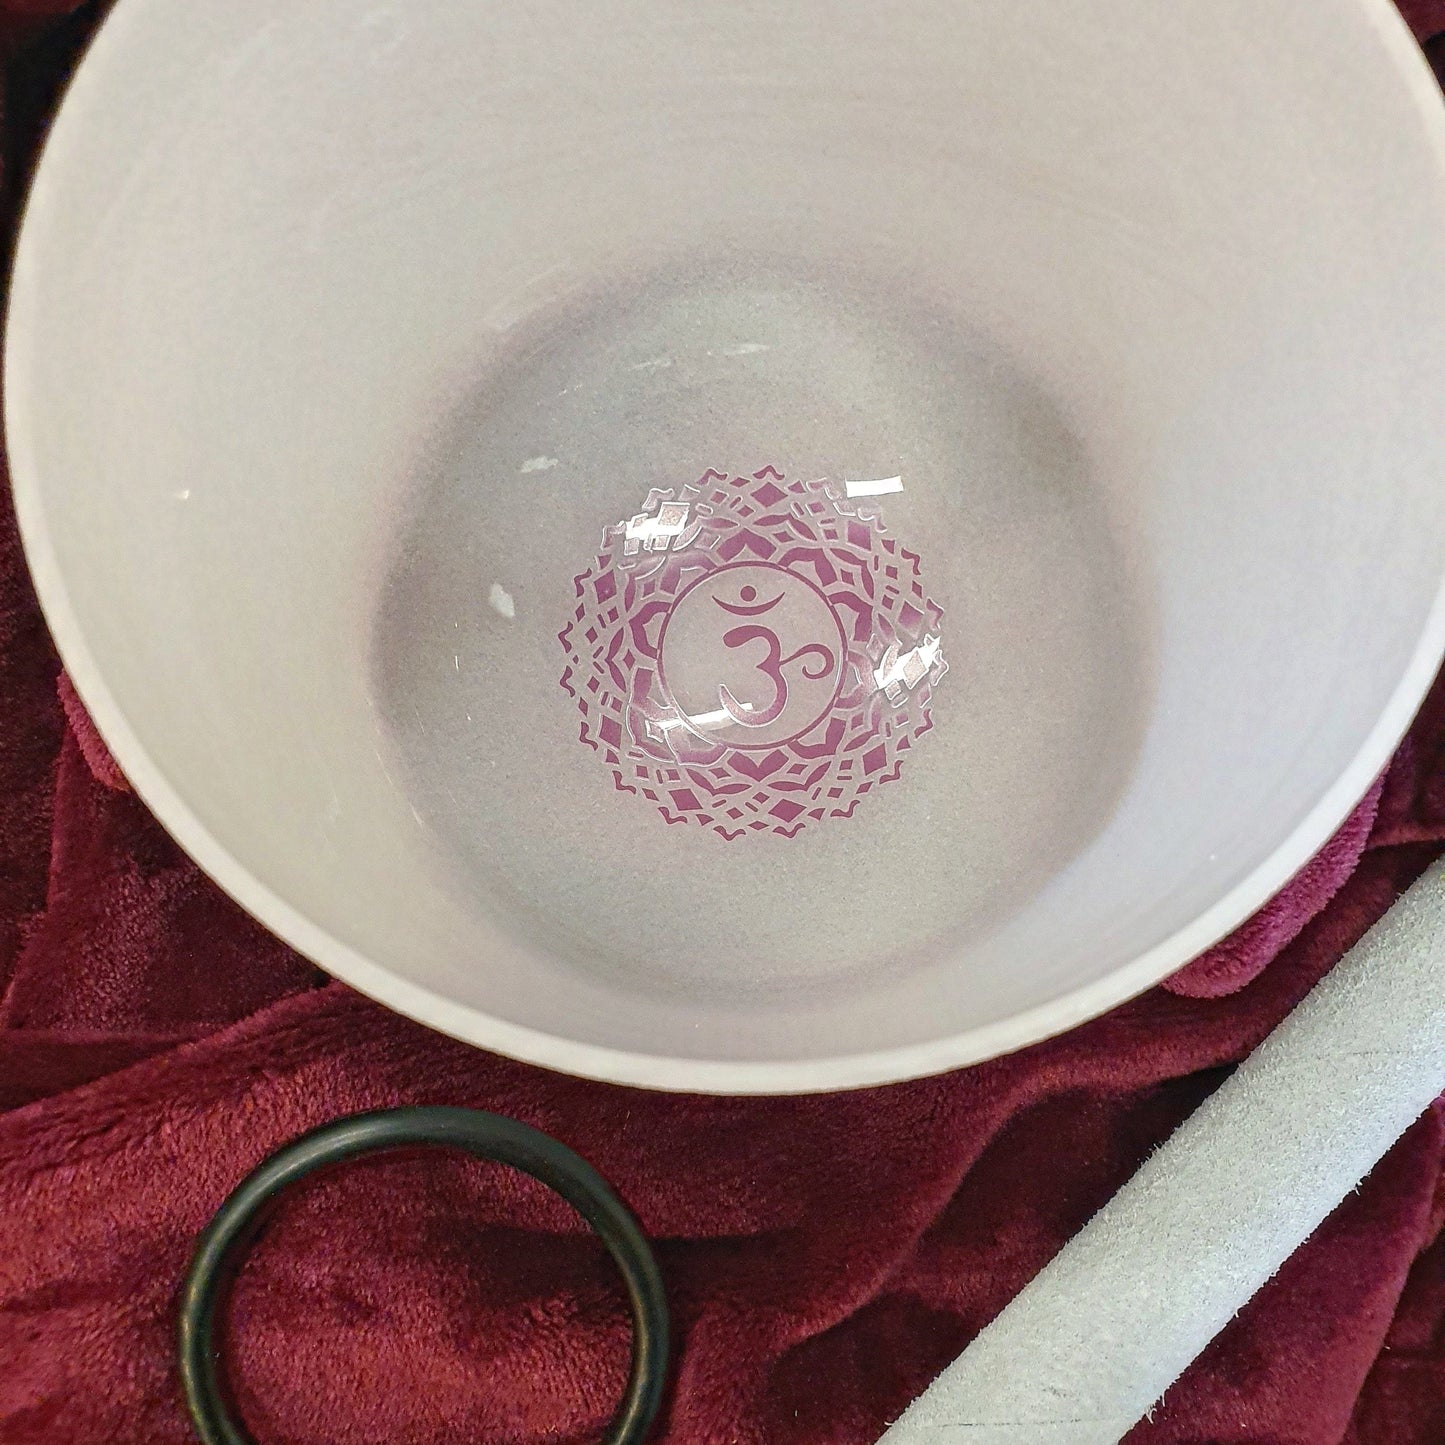 Crown Chakra - Crystal Singing Bowl - In Store Pick Up Only